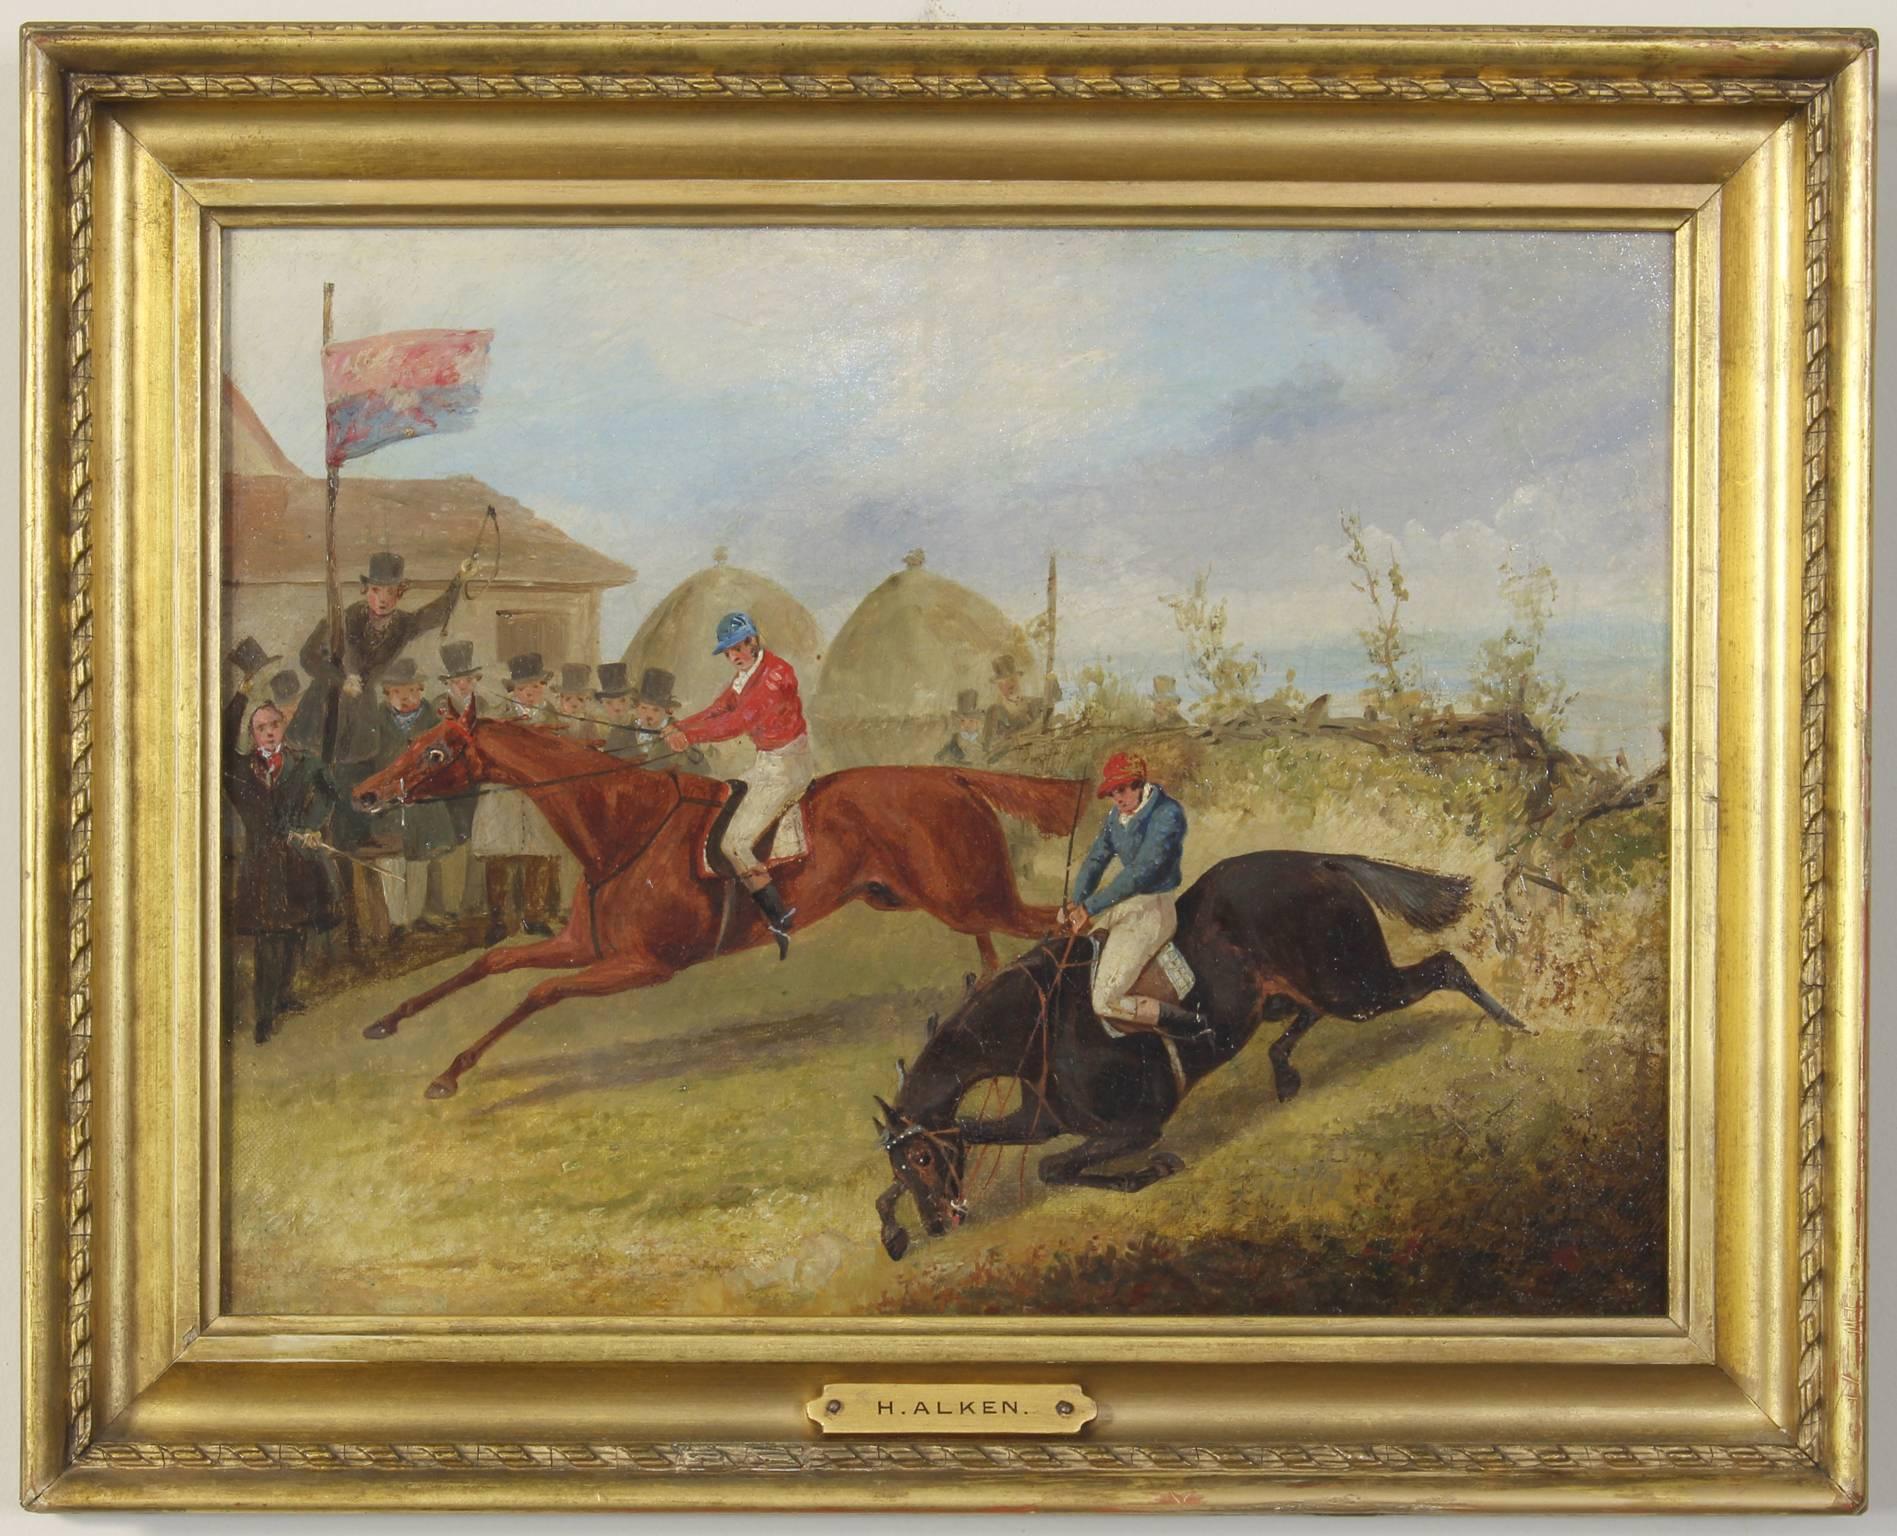 Sporting Art Pair of Early 19th Century English Sporting Paintings by Henry Alken